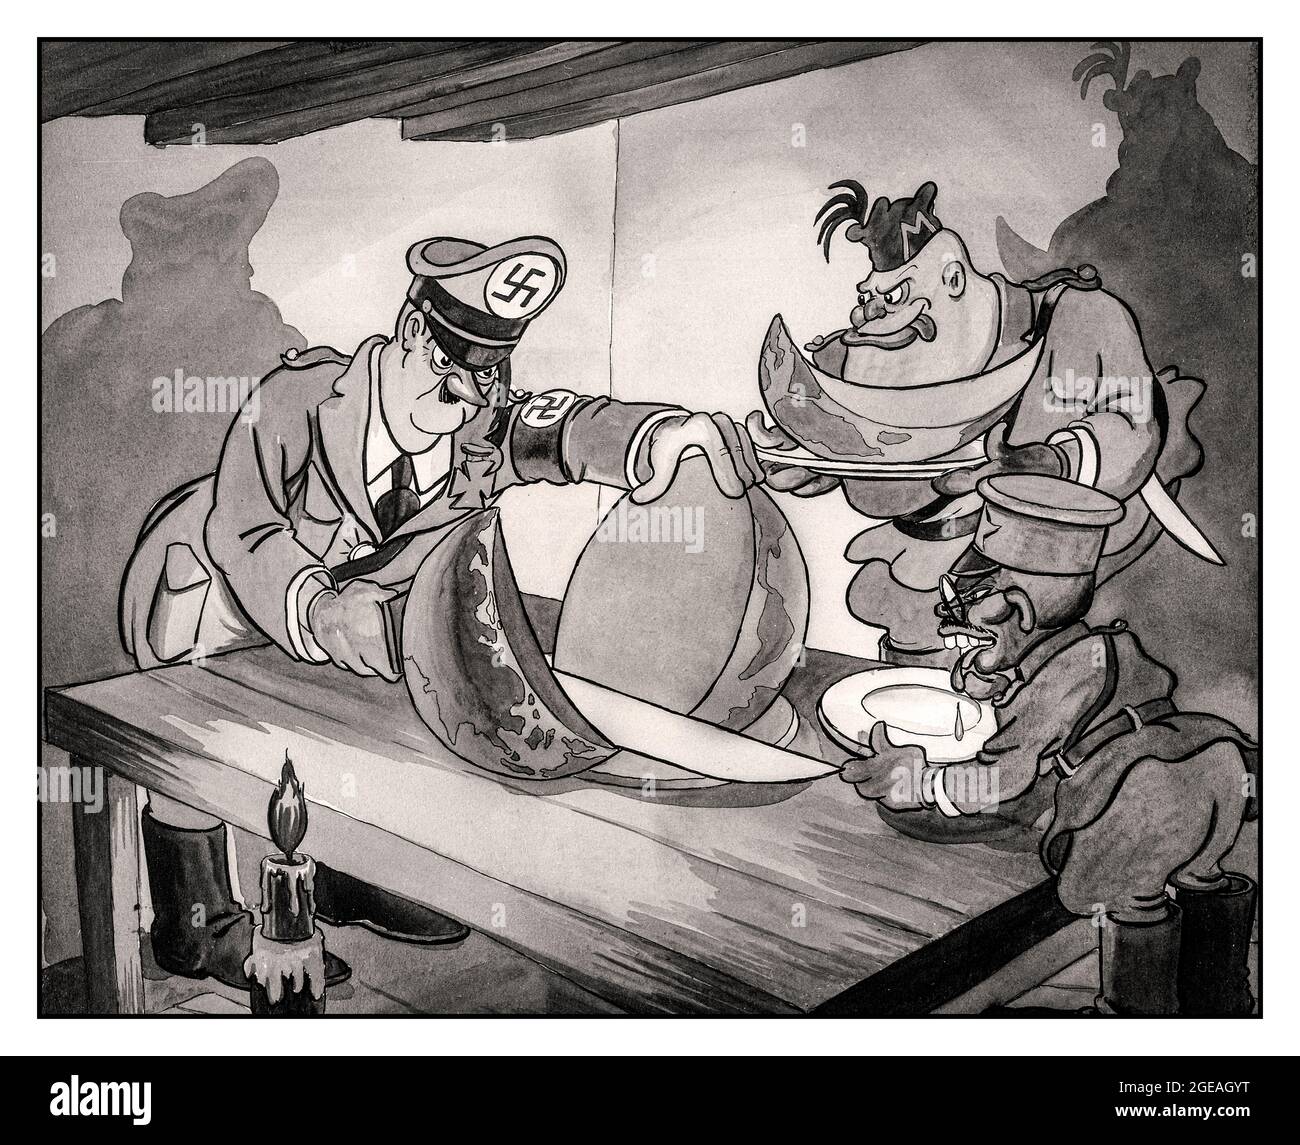 Propaganda Axis WW2 Cartoon of Hitler Mussolini and Hirohito 'To another  Asia and The Pacific Ocean, drawing for filmstrip, 'The Fruits of  Aggression' The chief axis leaders were Adolf Hitler of Germany,